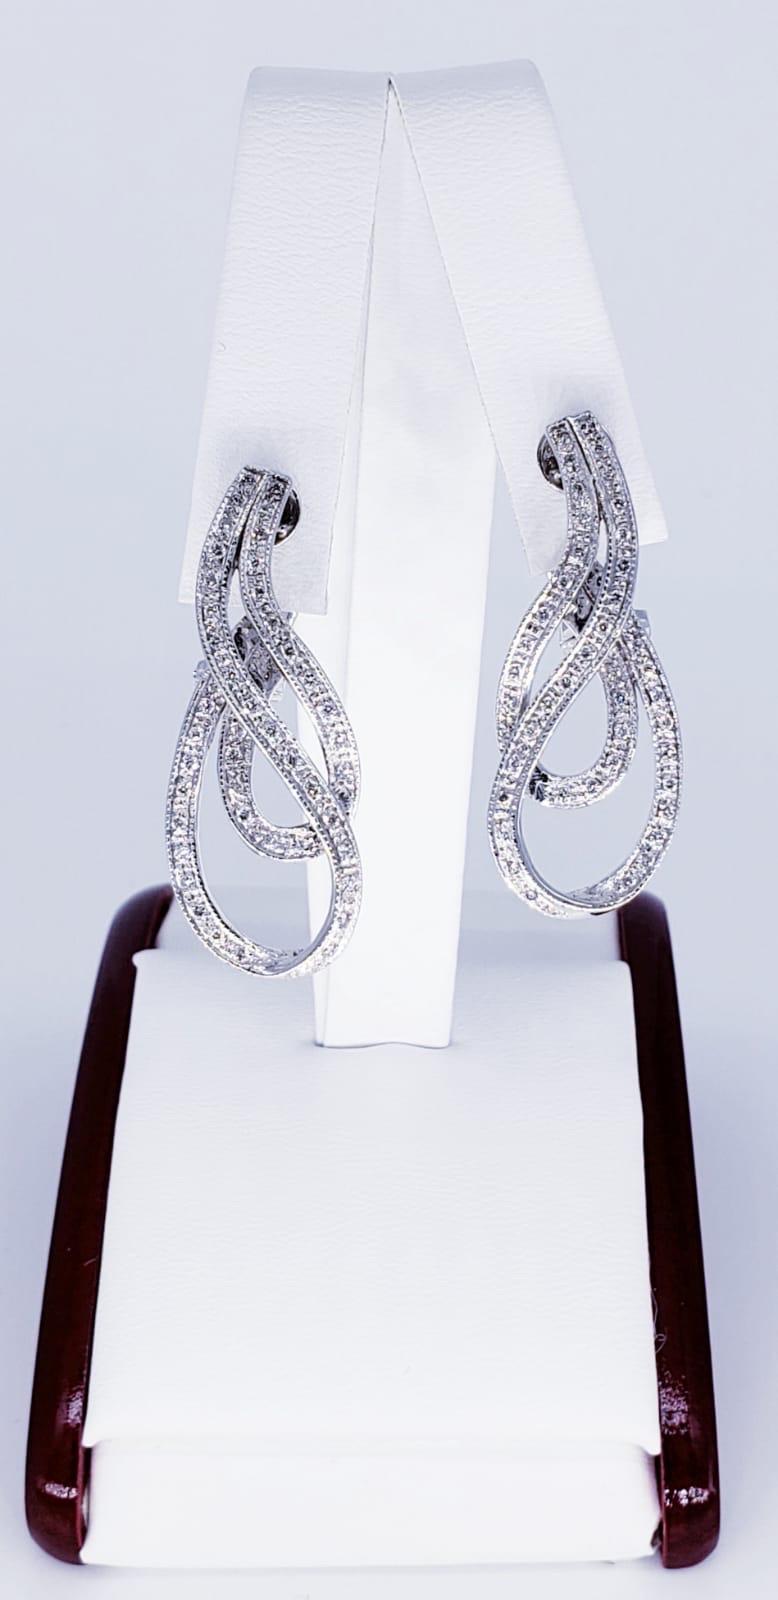 Art Deco 1.20 Carats Diamond Earrings. The earrings have a beautiful design swiveling around making it stand out with the bright diamonds approximately weighing in total 1.20 carats. The earrings are crafted in 18 karat solid gold & weight 13.5